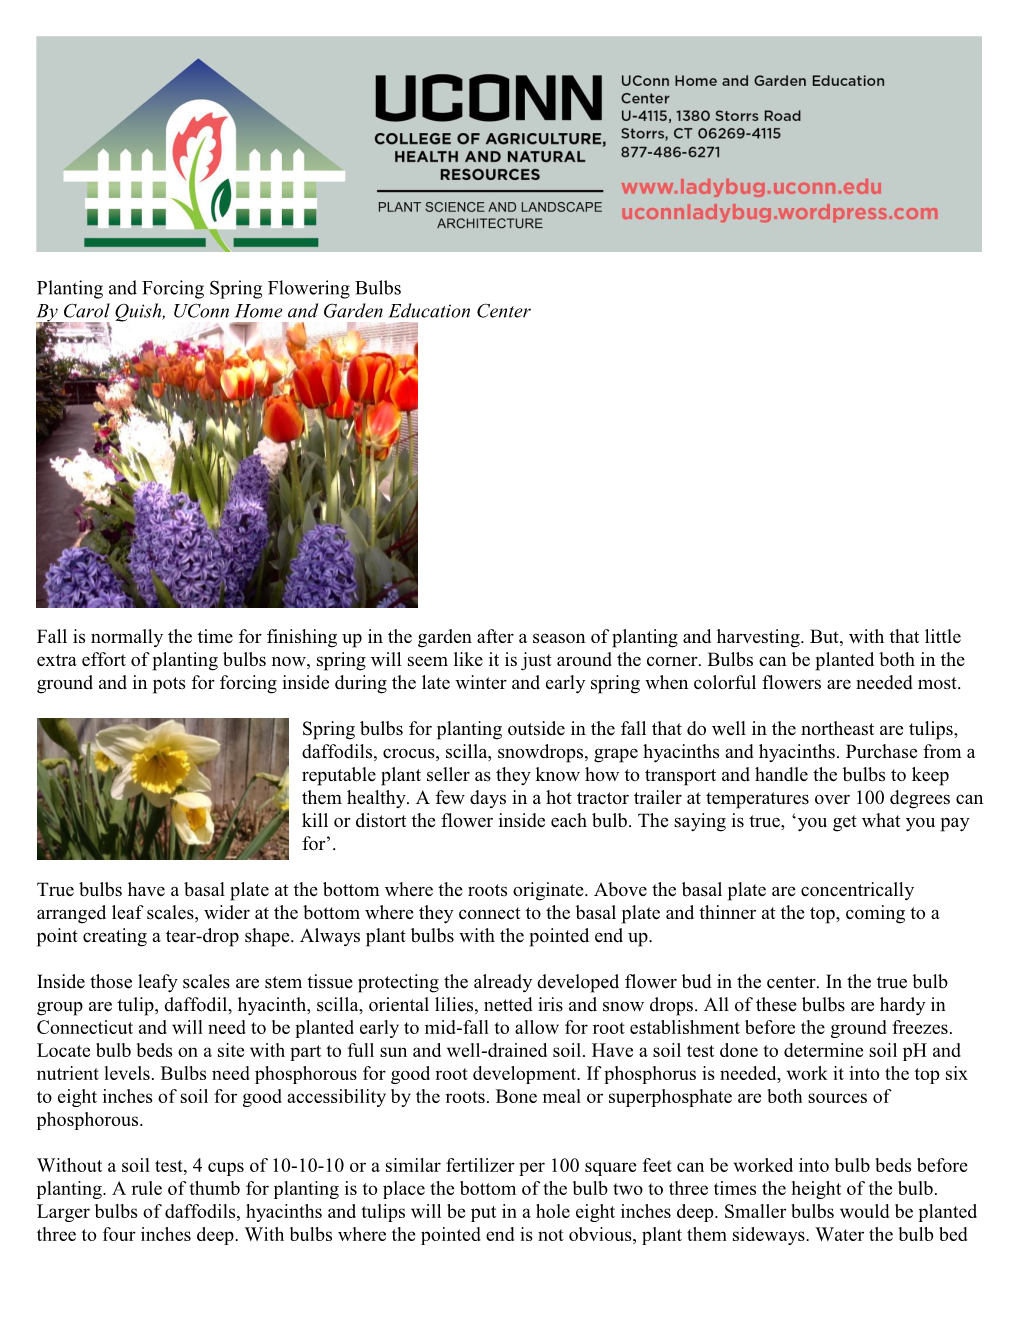 Planting and Forcing Spring Bulbs